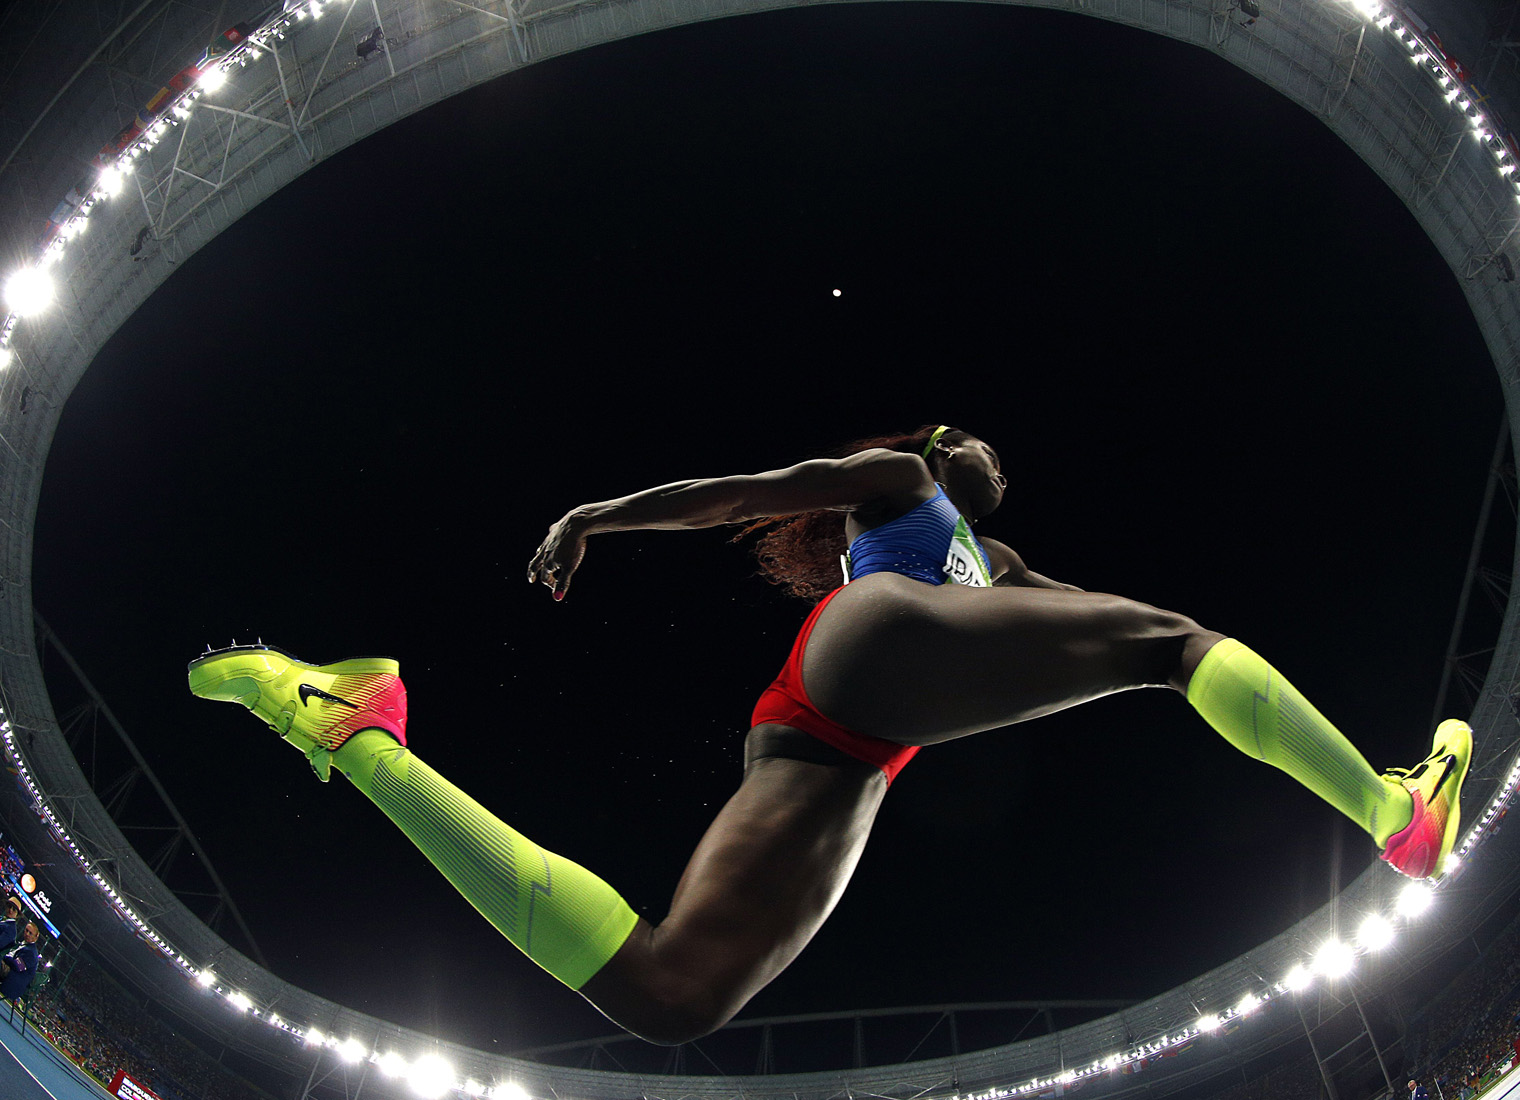 Colombia's Caterine Ibarguen competes in the Women's Triple Jump Final during the athletics event at the Rio 2016 Olympic Games at the Olympic Stadium in Rio de Janeiro on August 14, 2016. / AFP / Adrian DENNIS (Photo credit should read ADRIAN DENNIS/AFP/Getty Images)